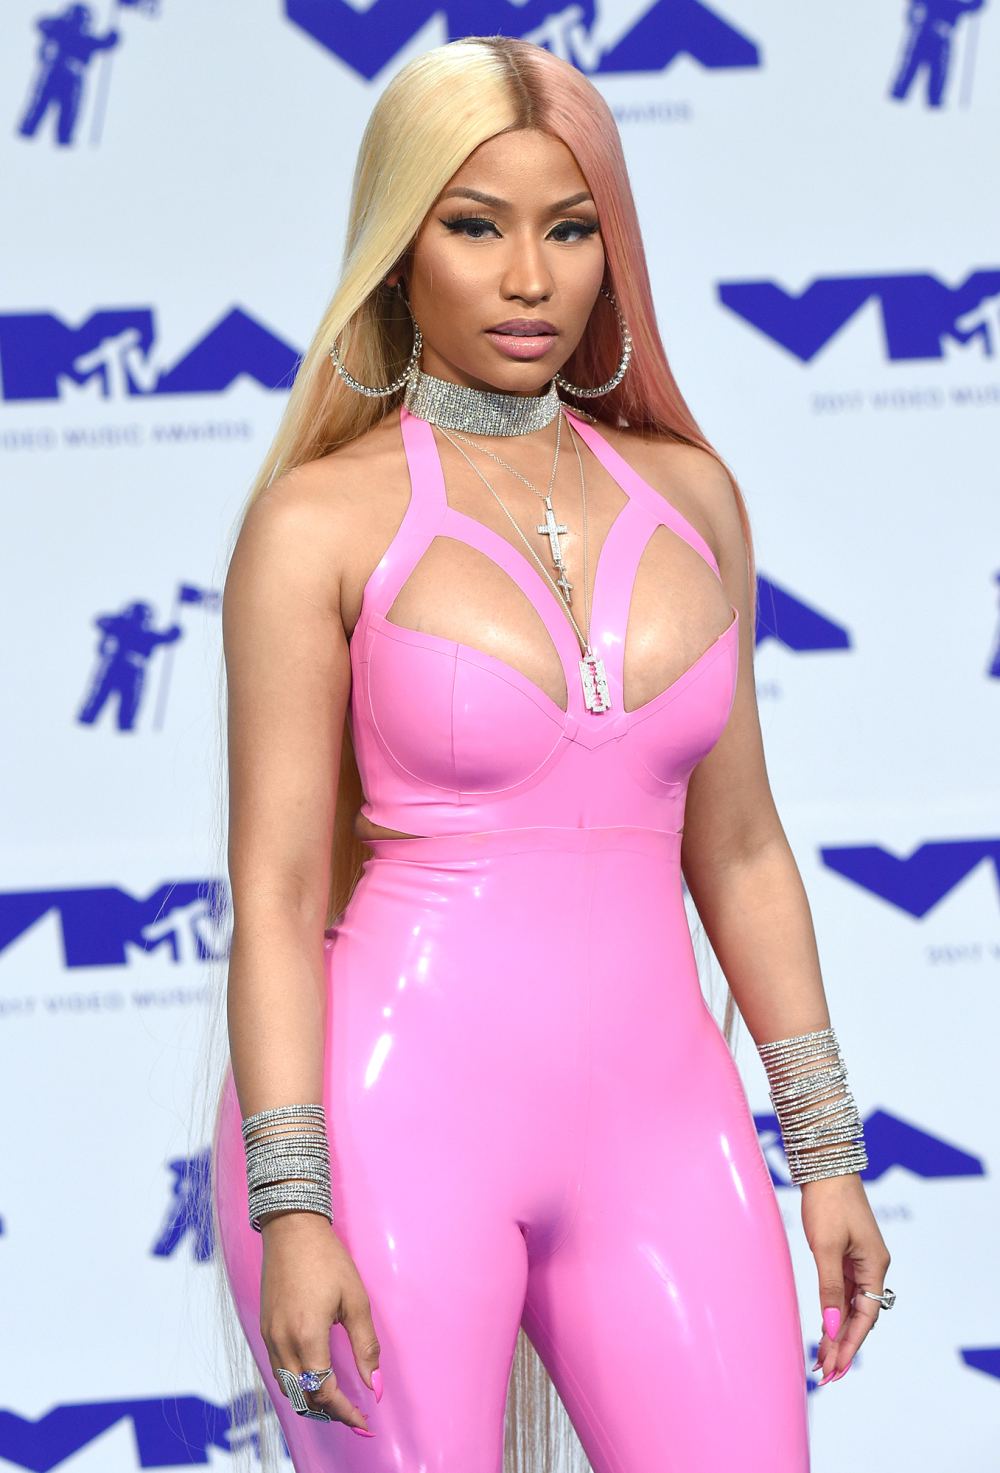 Nicki Minaj Gets Real About Feeling ‘Guilty’ as a Working Mom to 9-Month-Old Son